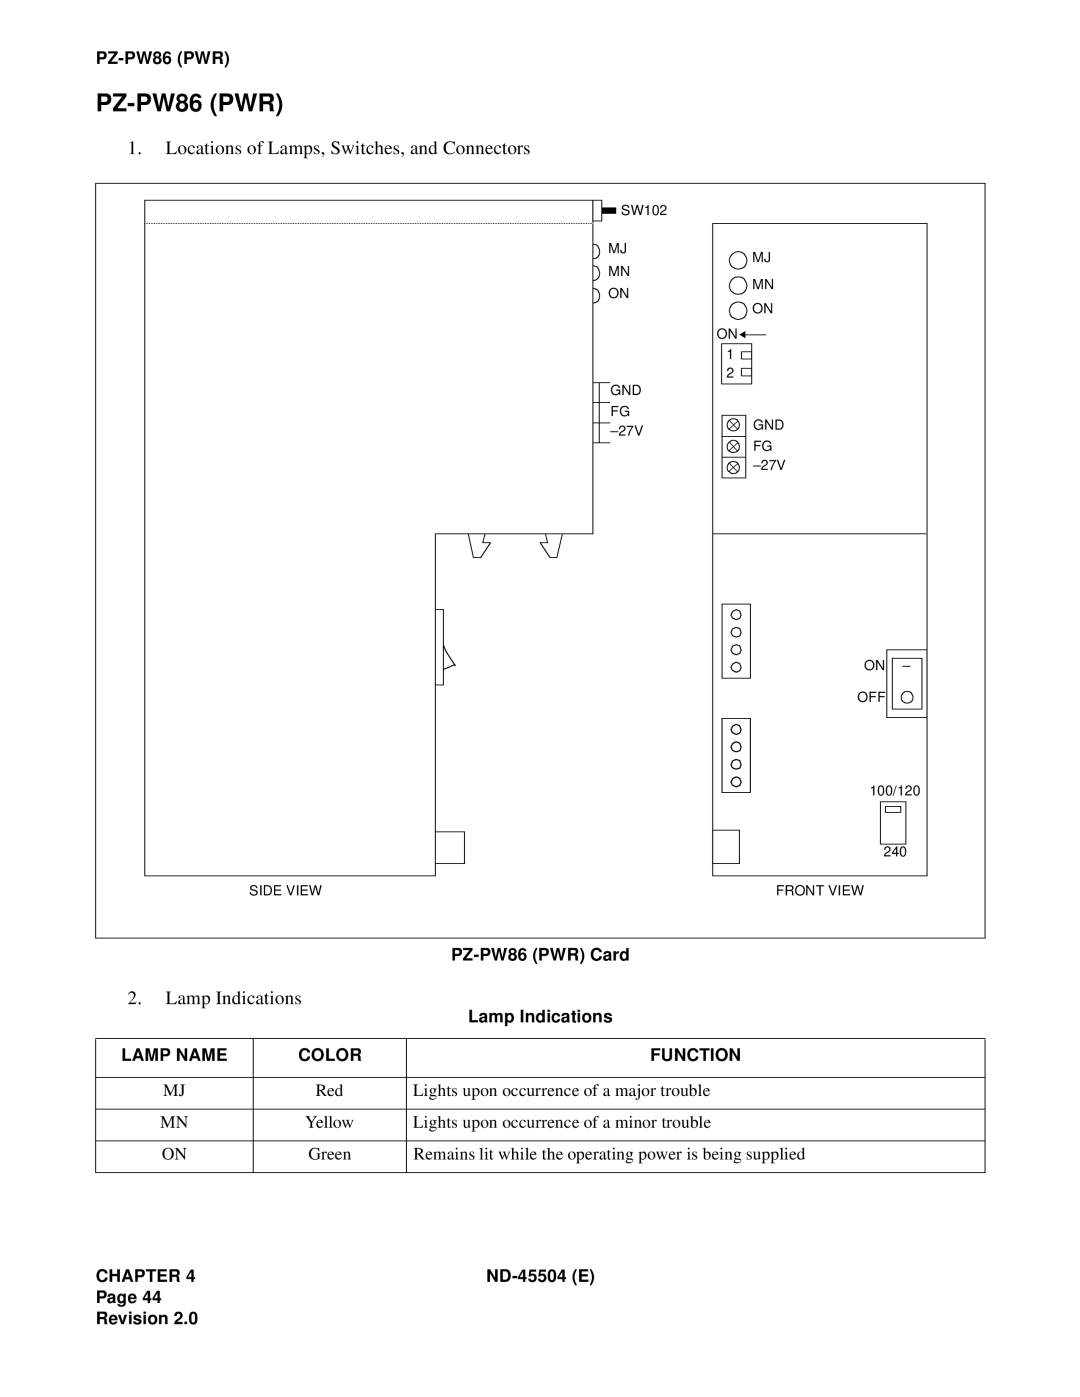 NEC 2000 IVS manual Locations of Lamps, Switches, and Connectors, Lamp Indications, PZ-PW86PWR Card, Lamp Name, Color 